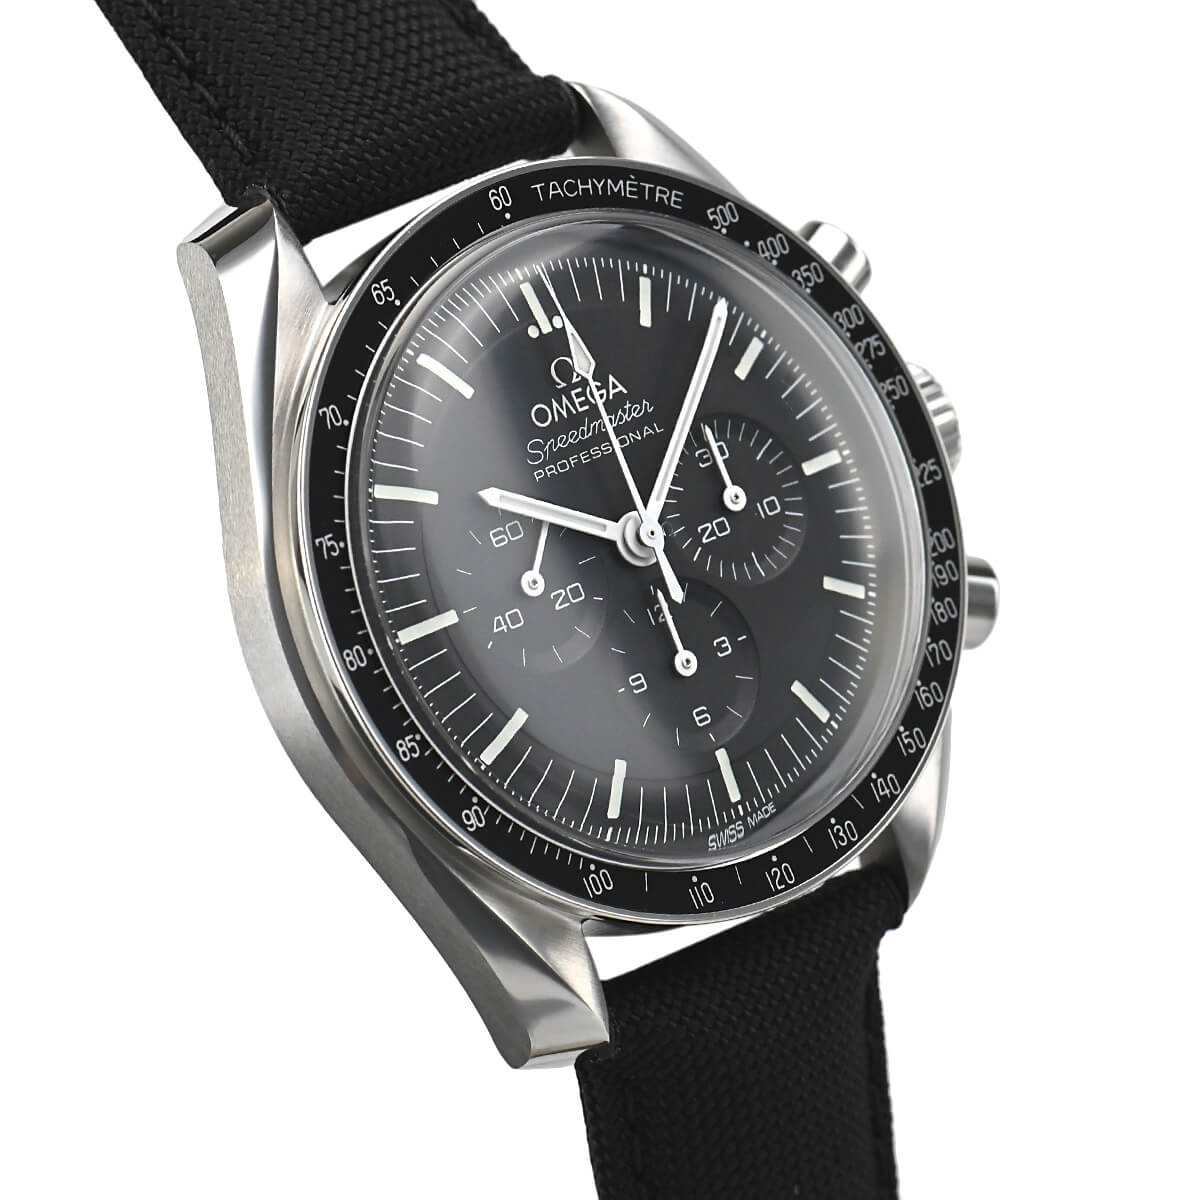 Omega Speedmaster Moonwatch Co-Axial Master Chronometer 310.32.42.50.01.001